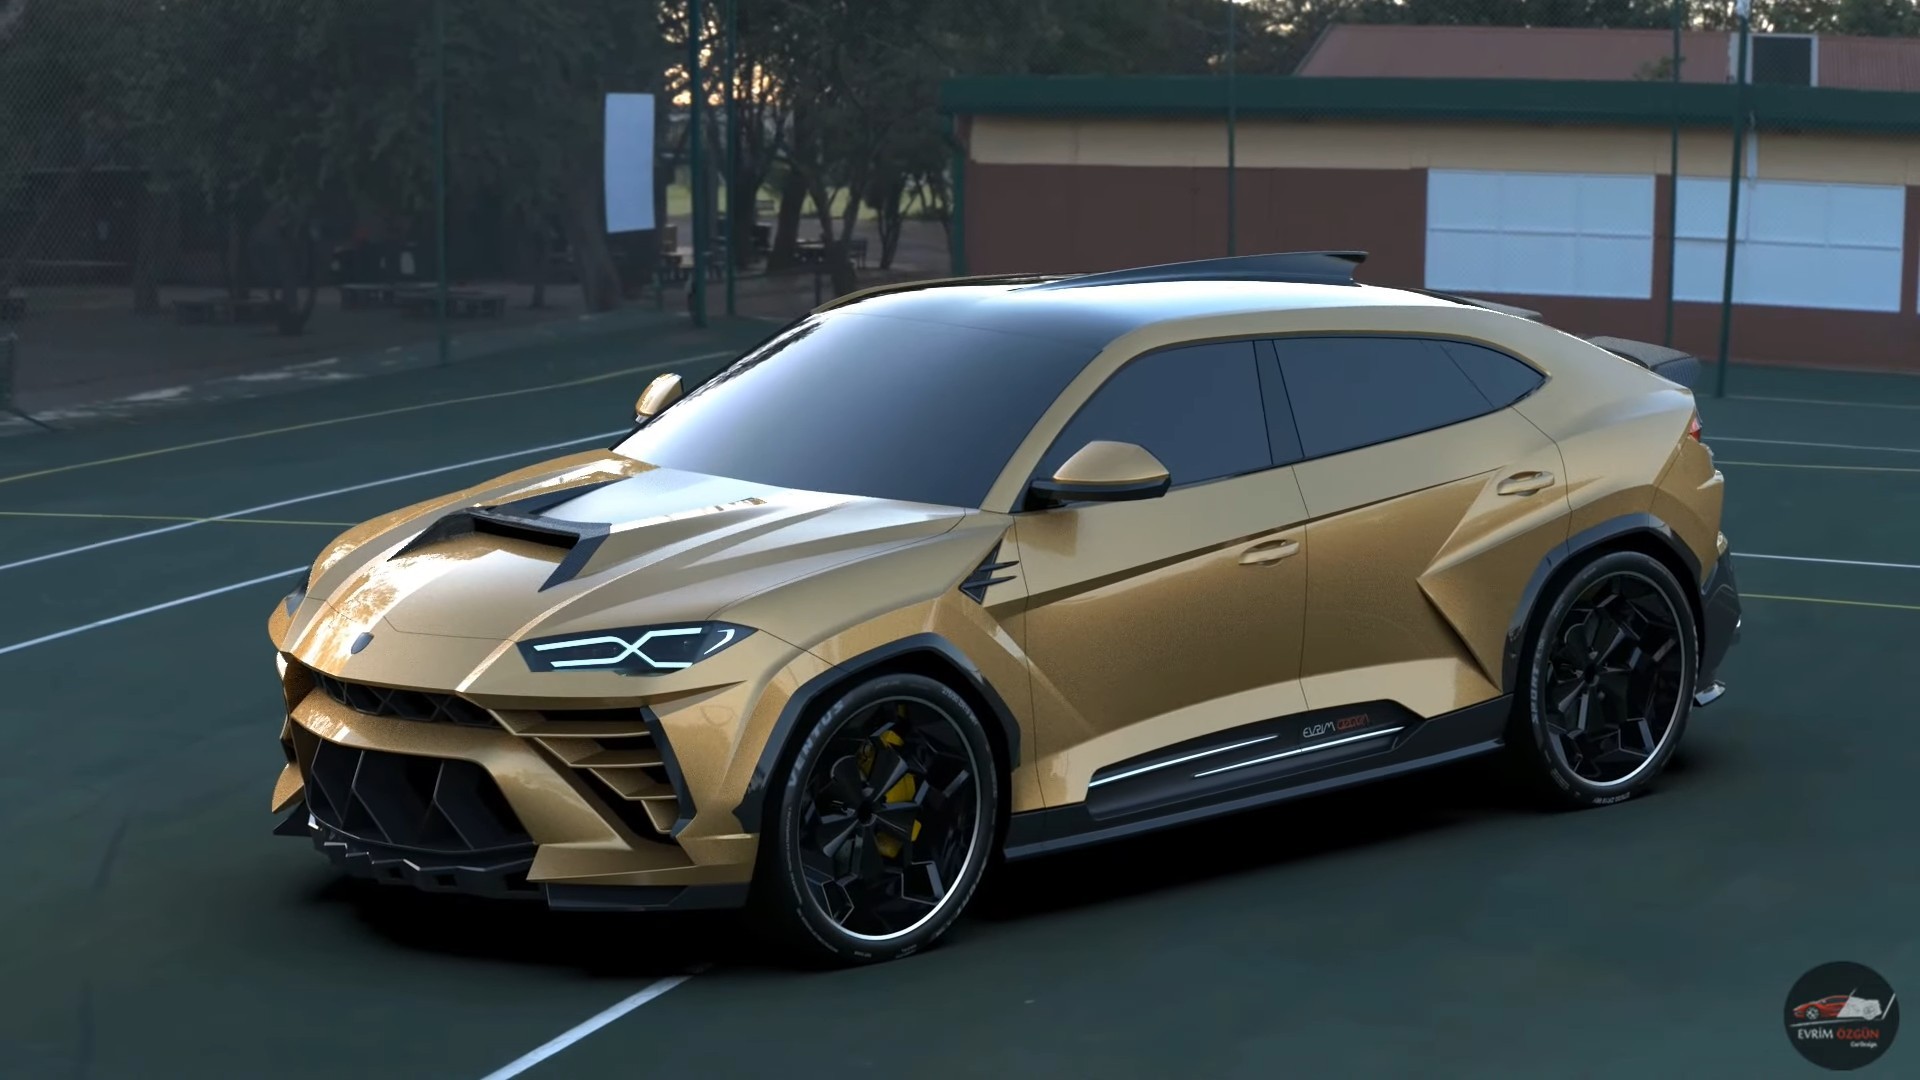 2024 Lambo Urus Has a Curious Case of Virtual Tuning, Looks Ready for